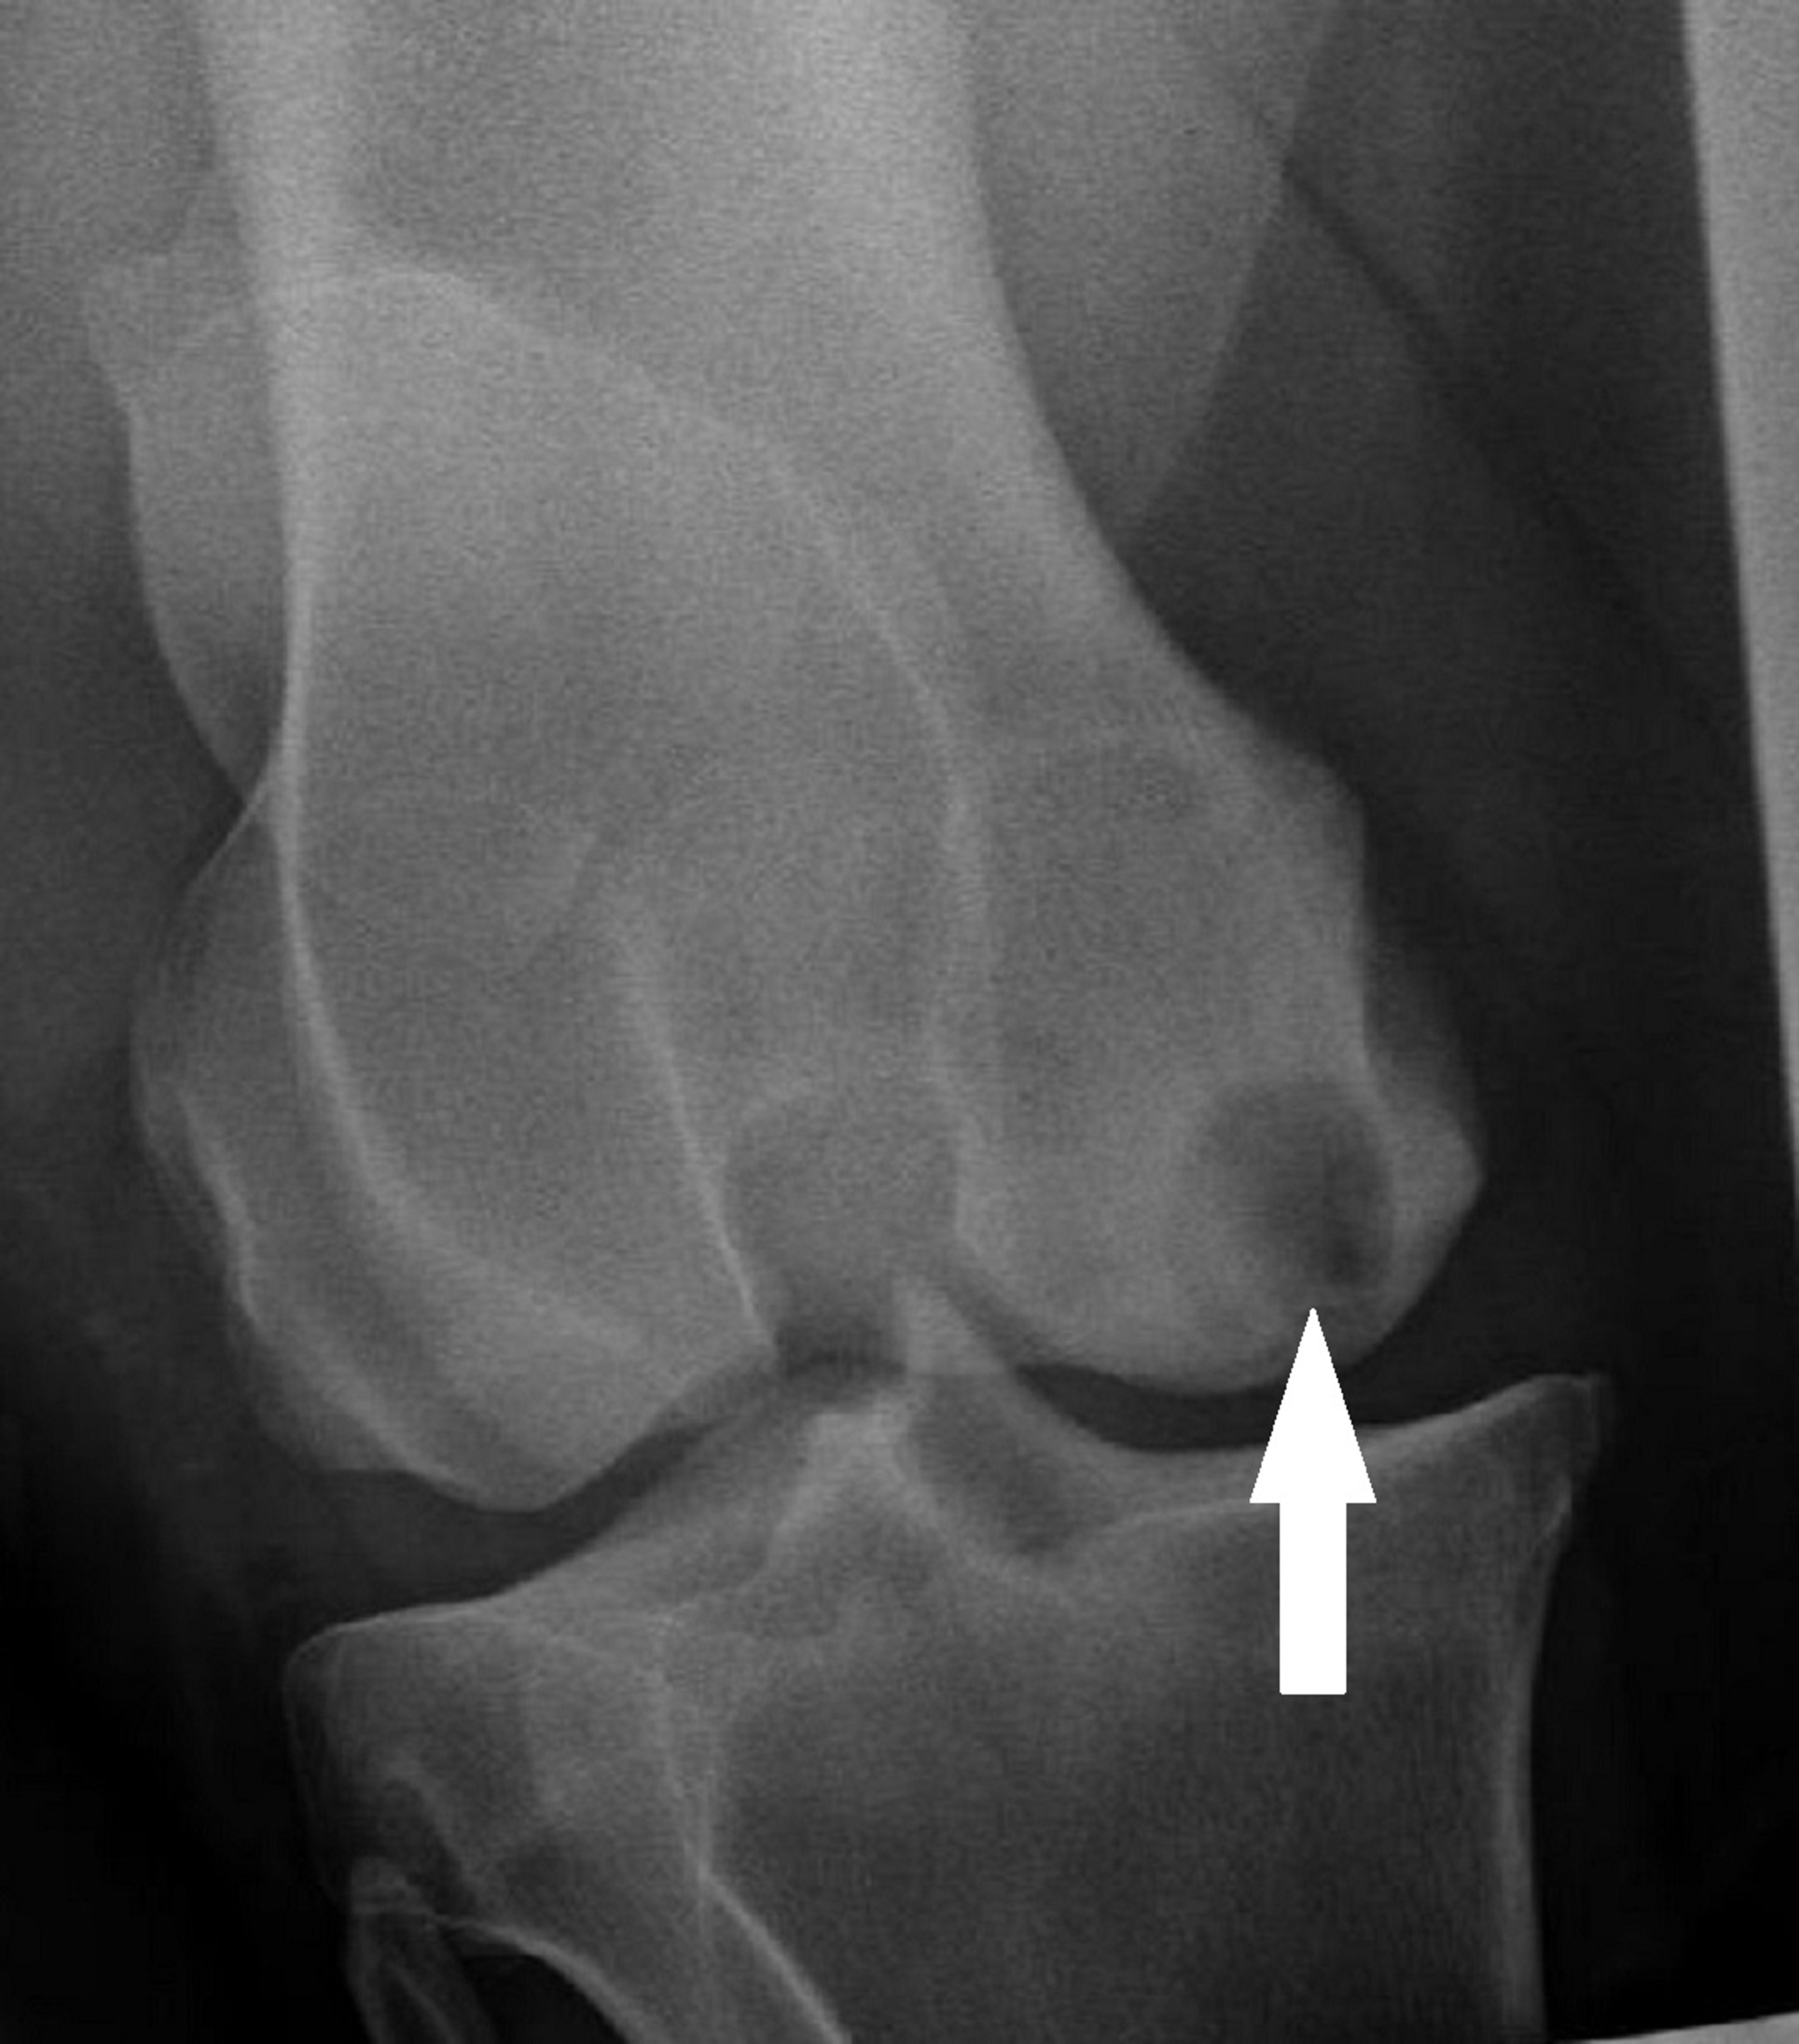 Subchondral bone cyst, horse